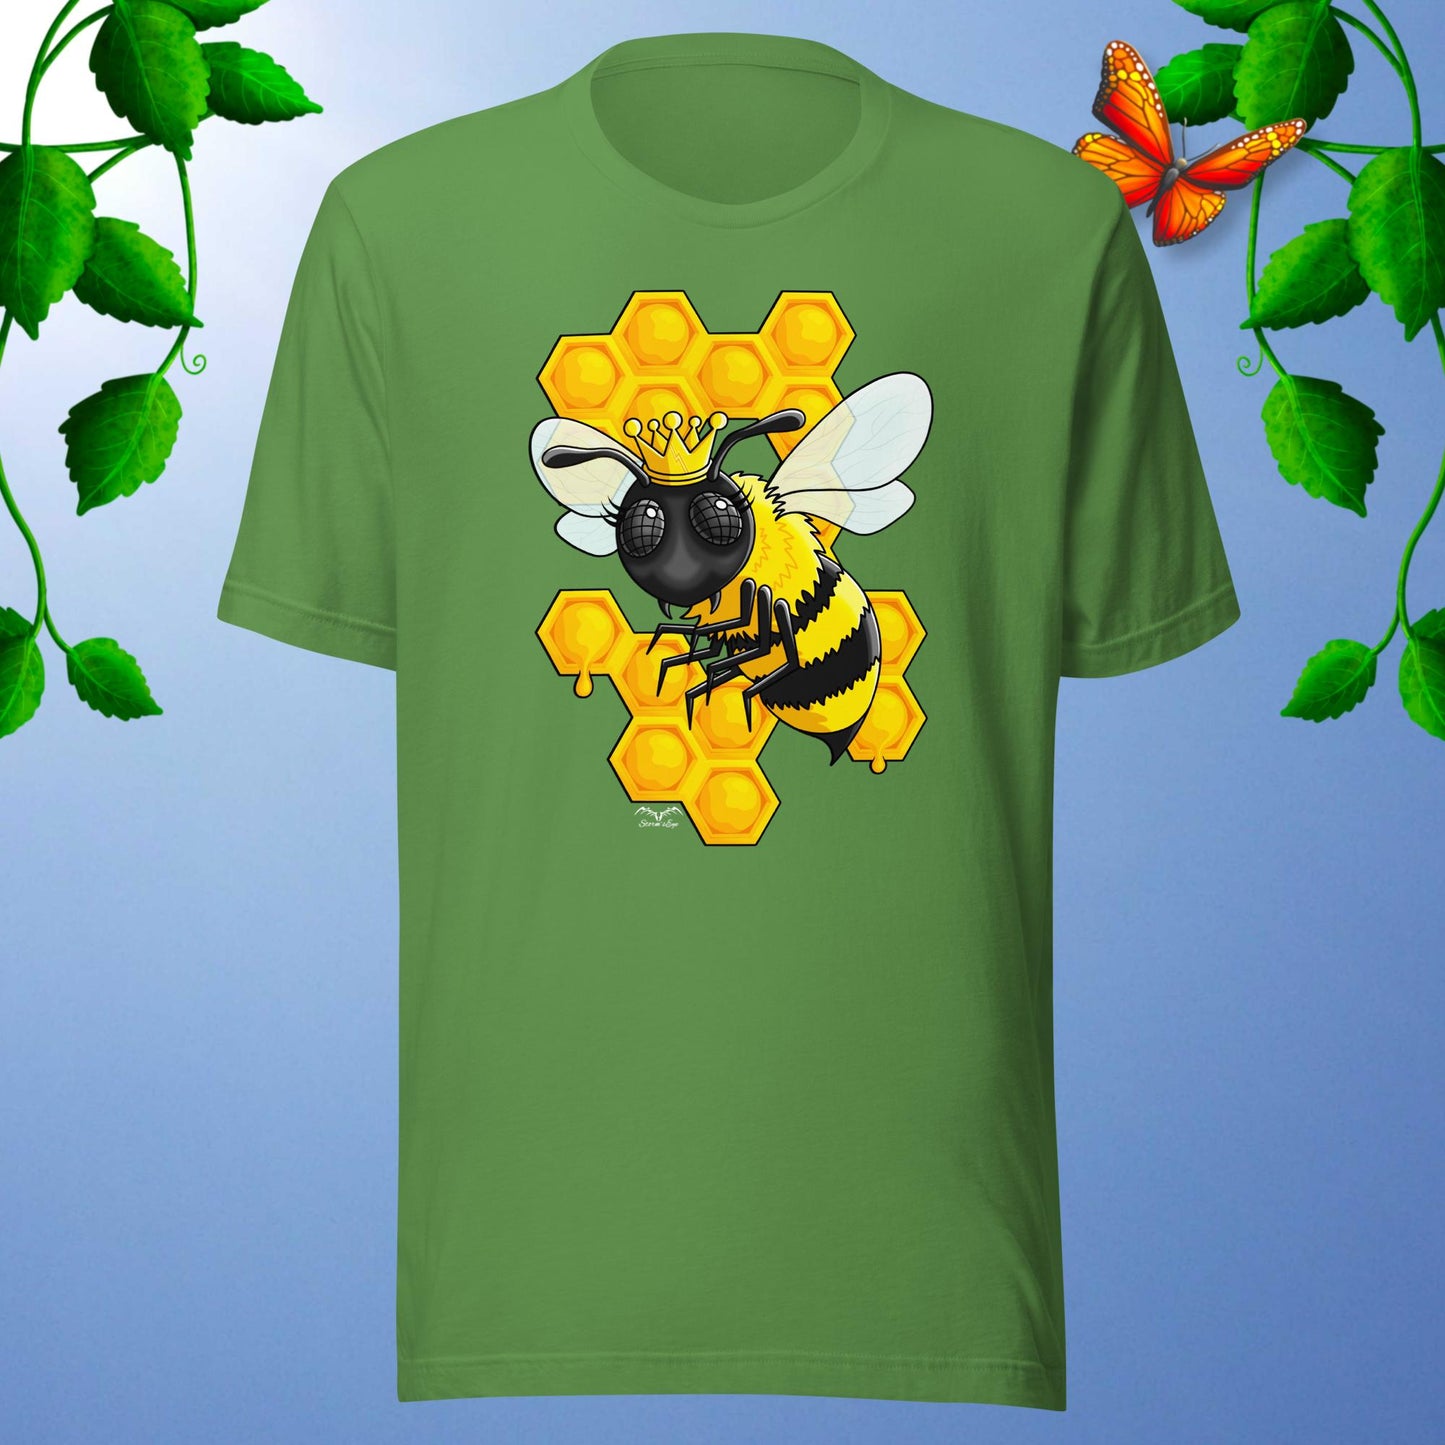 queen bee t-shirt bright green by stormseye design